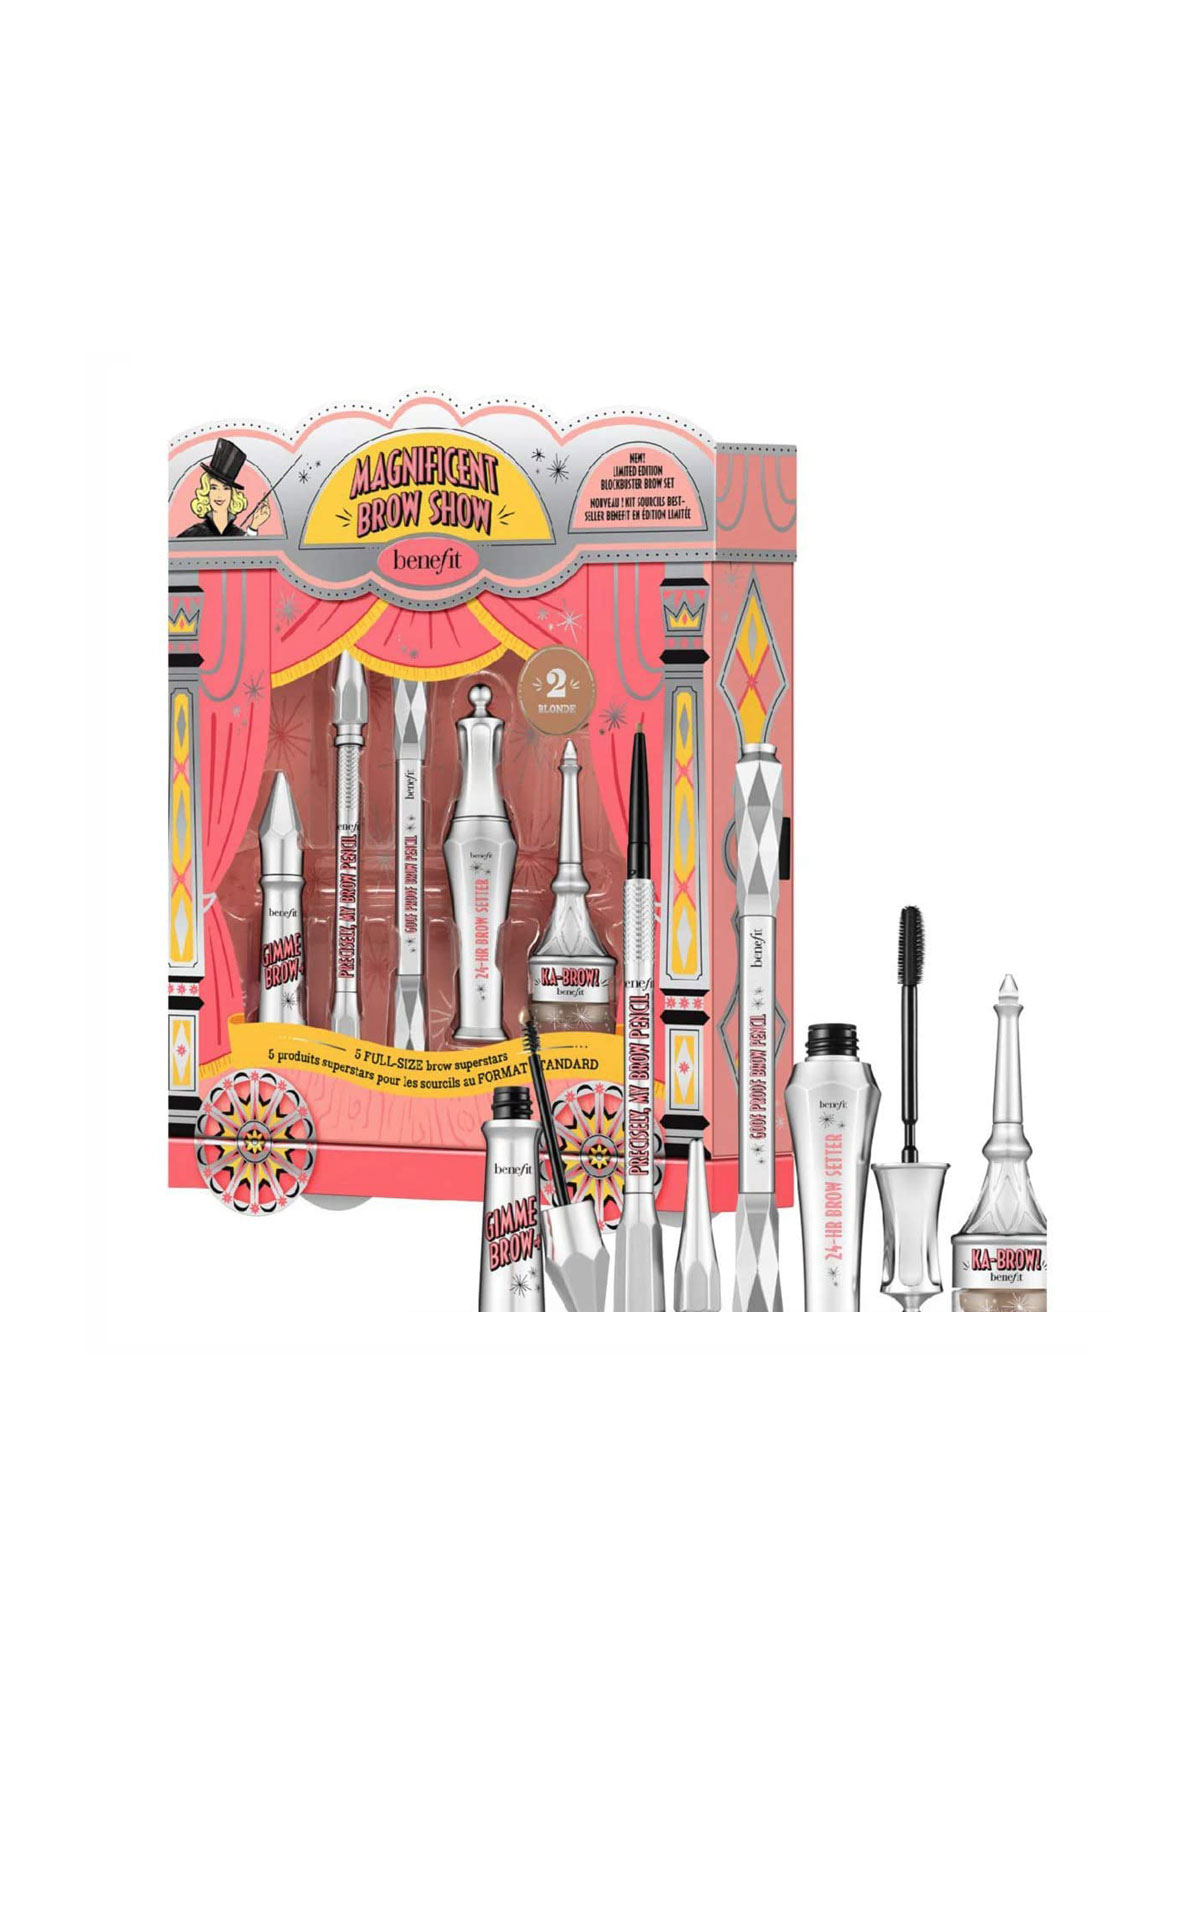 Benefit Cosmetics Magnificent brow show from Bicester Village